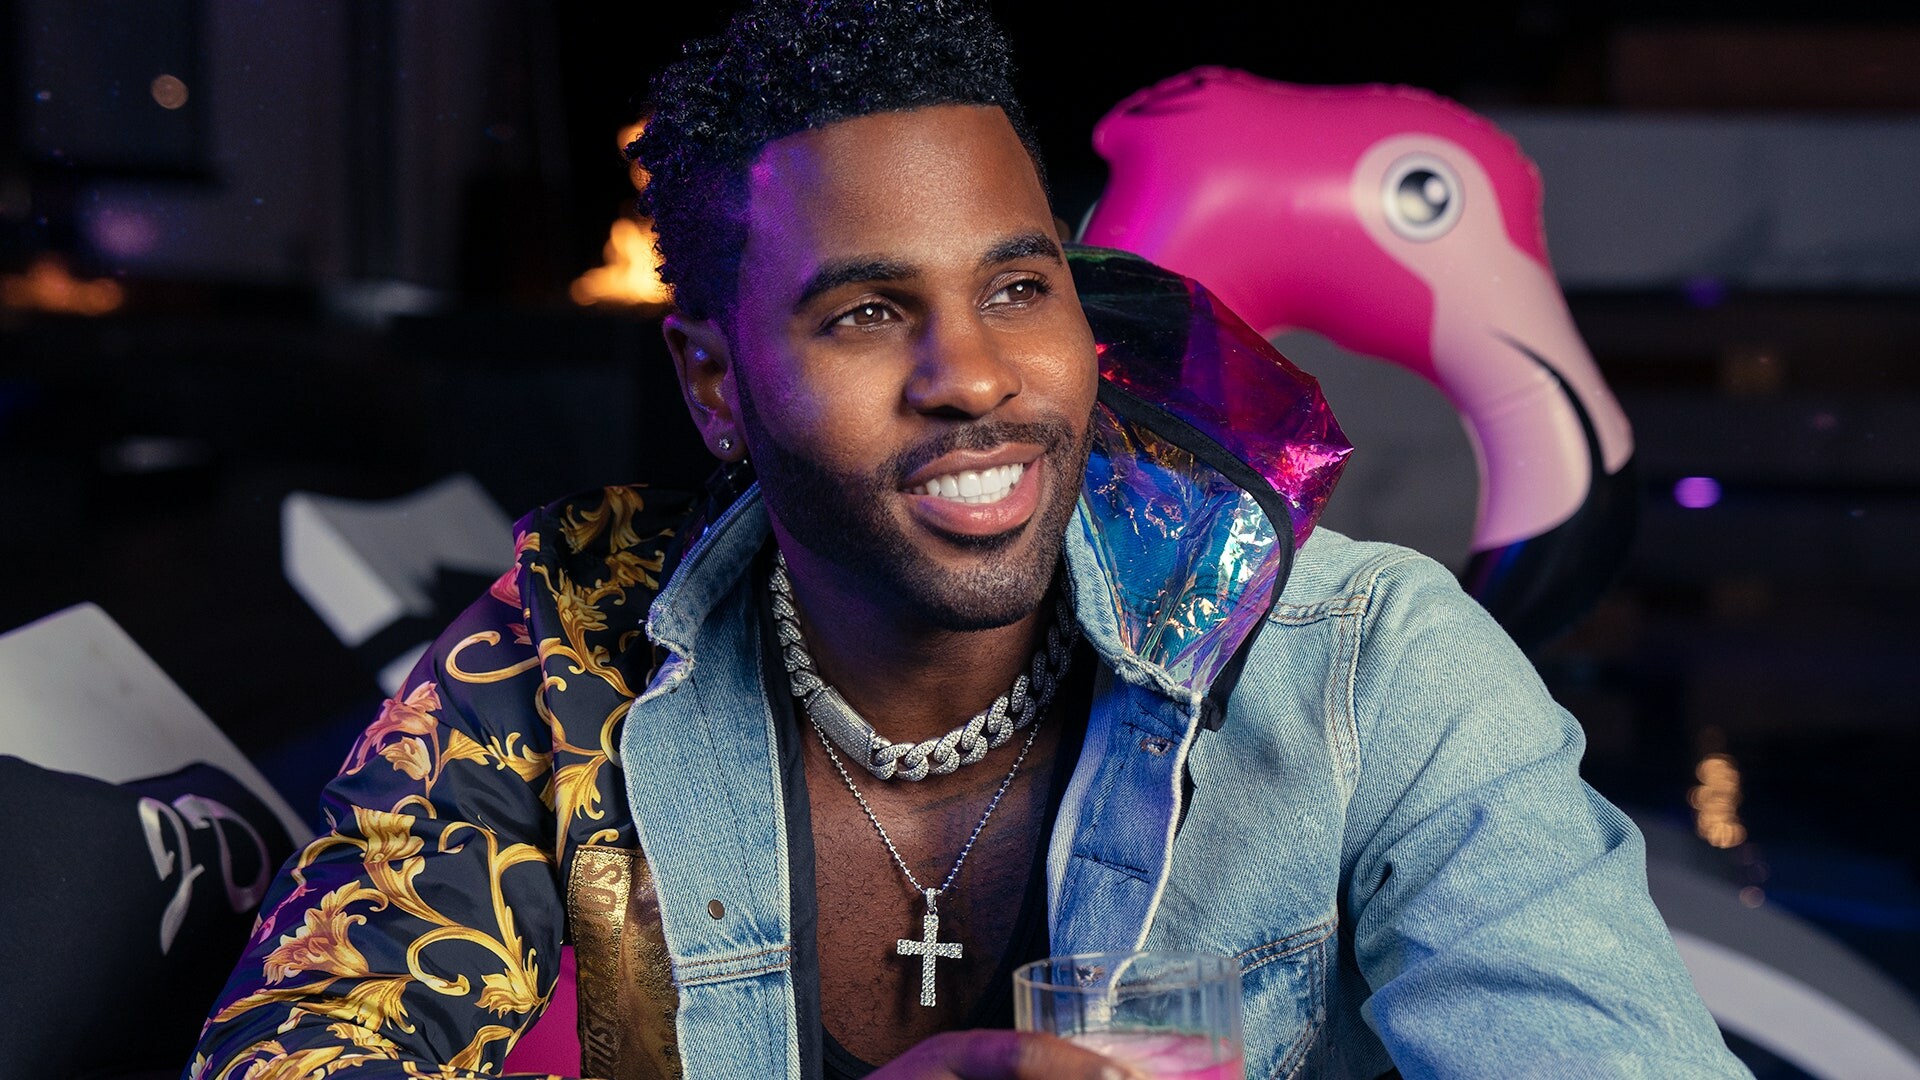 Jason Derulo: "Kiss the Sky", which appeared on the soundtrack to the film Storks. 1920x1080 Full HD Wallpaper.